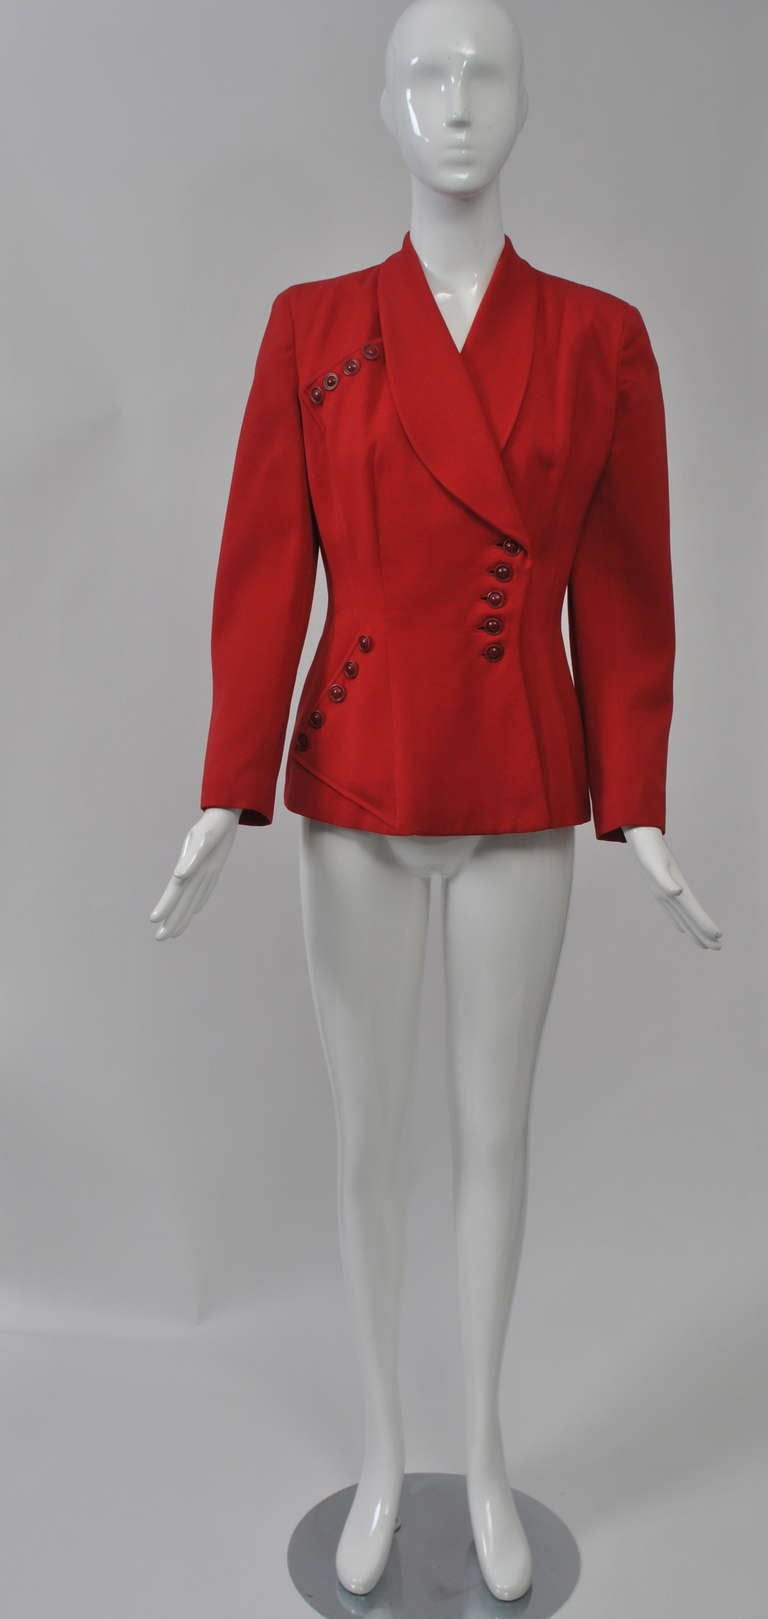 Red wool jacket from the late '40s/early '50s with interesting diagonal stitched and button detailing. Fitted, long jacket with shawl collar, padded shoulders, and bound buttonholes. Lined. Size M.